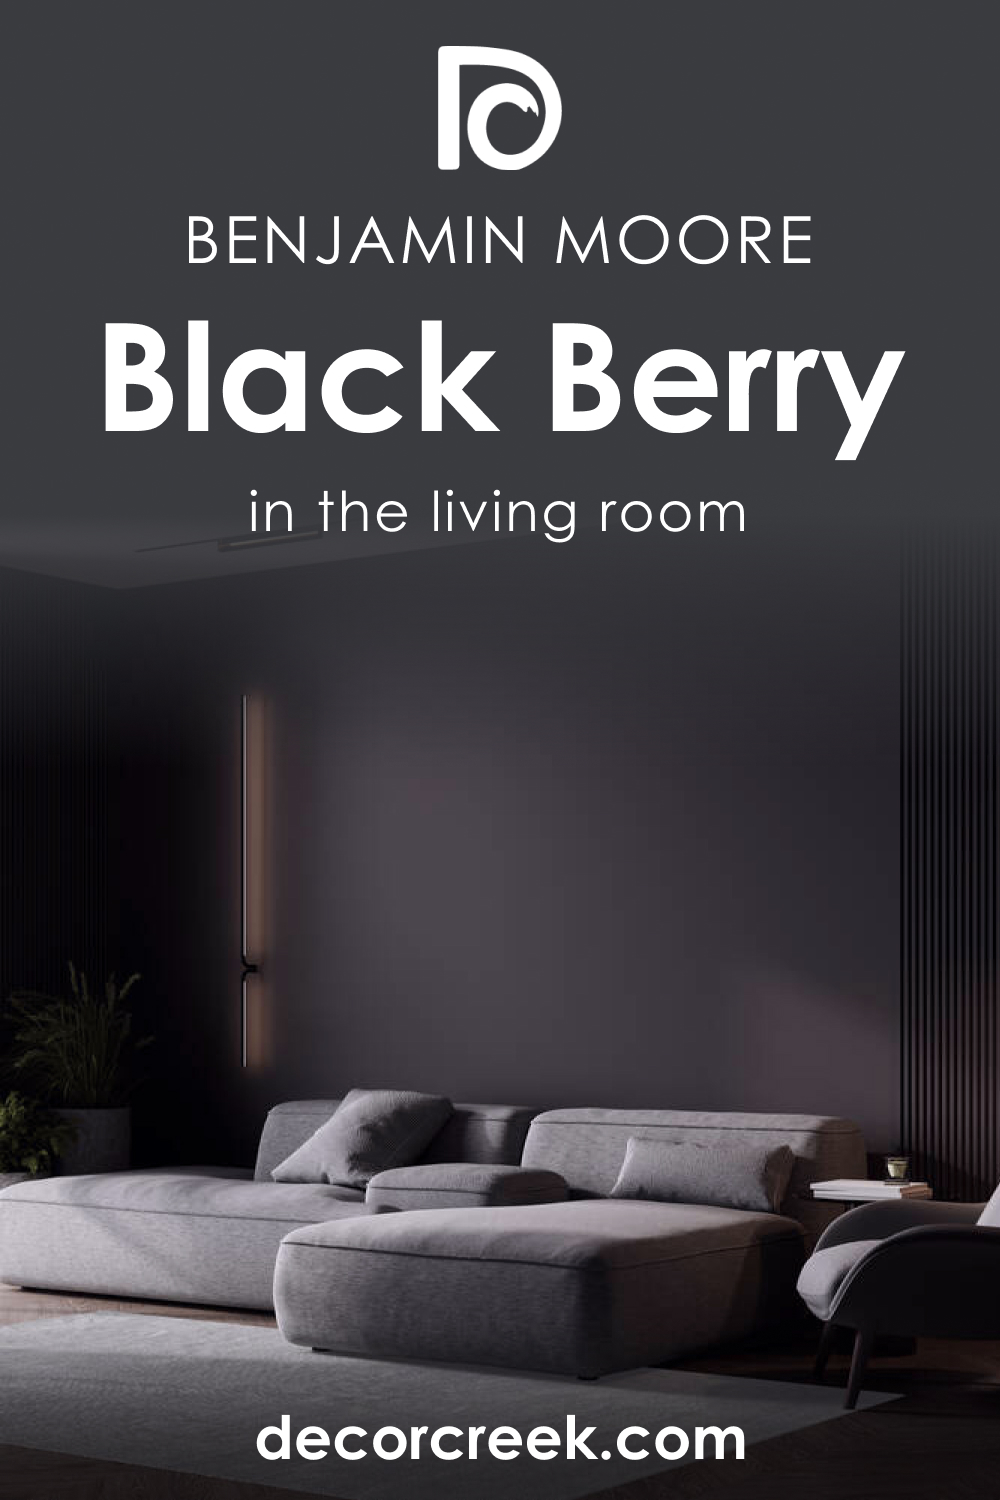 How to Use Black Berry 2119-20 in the Living Room?